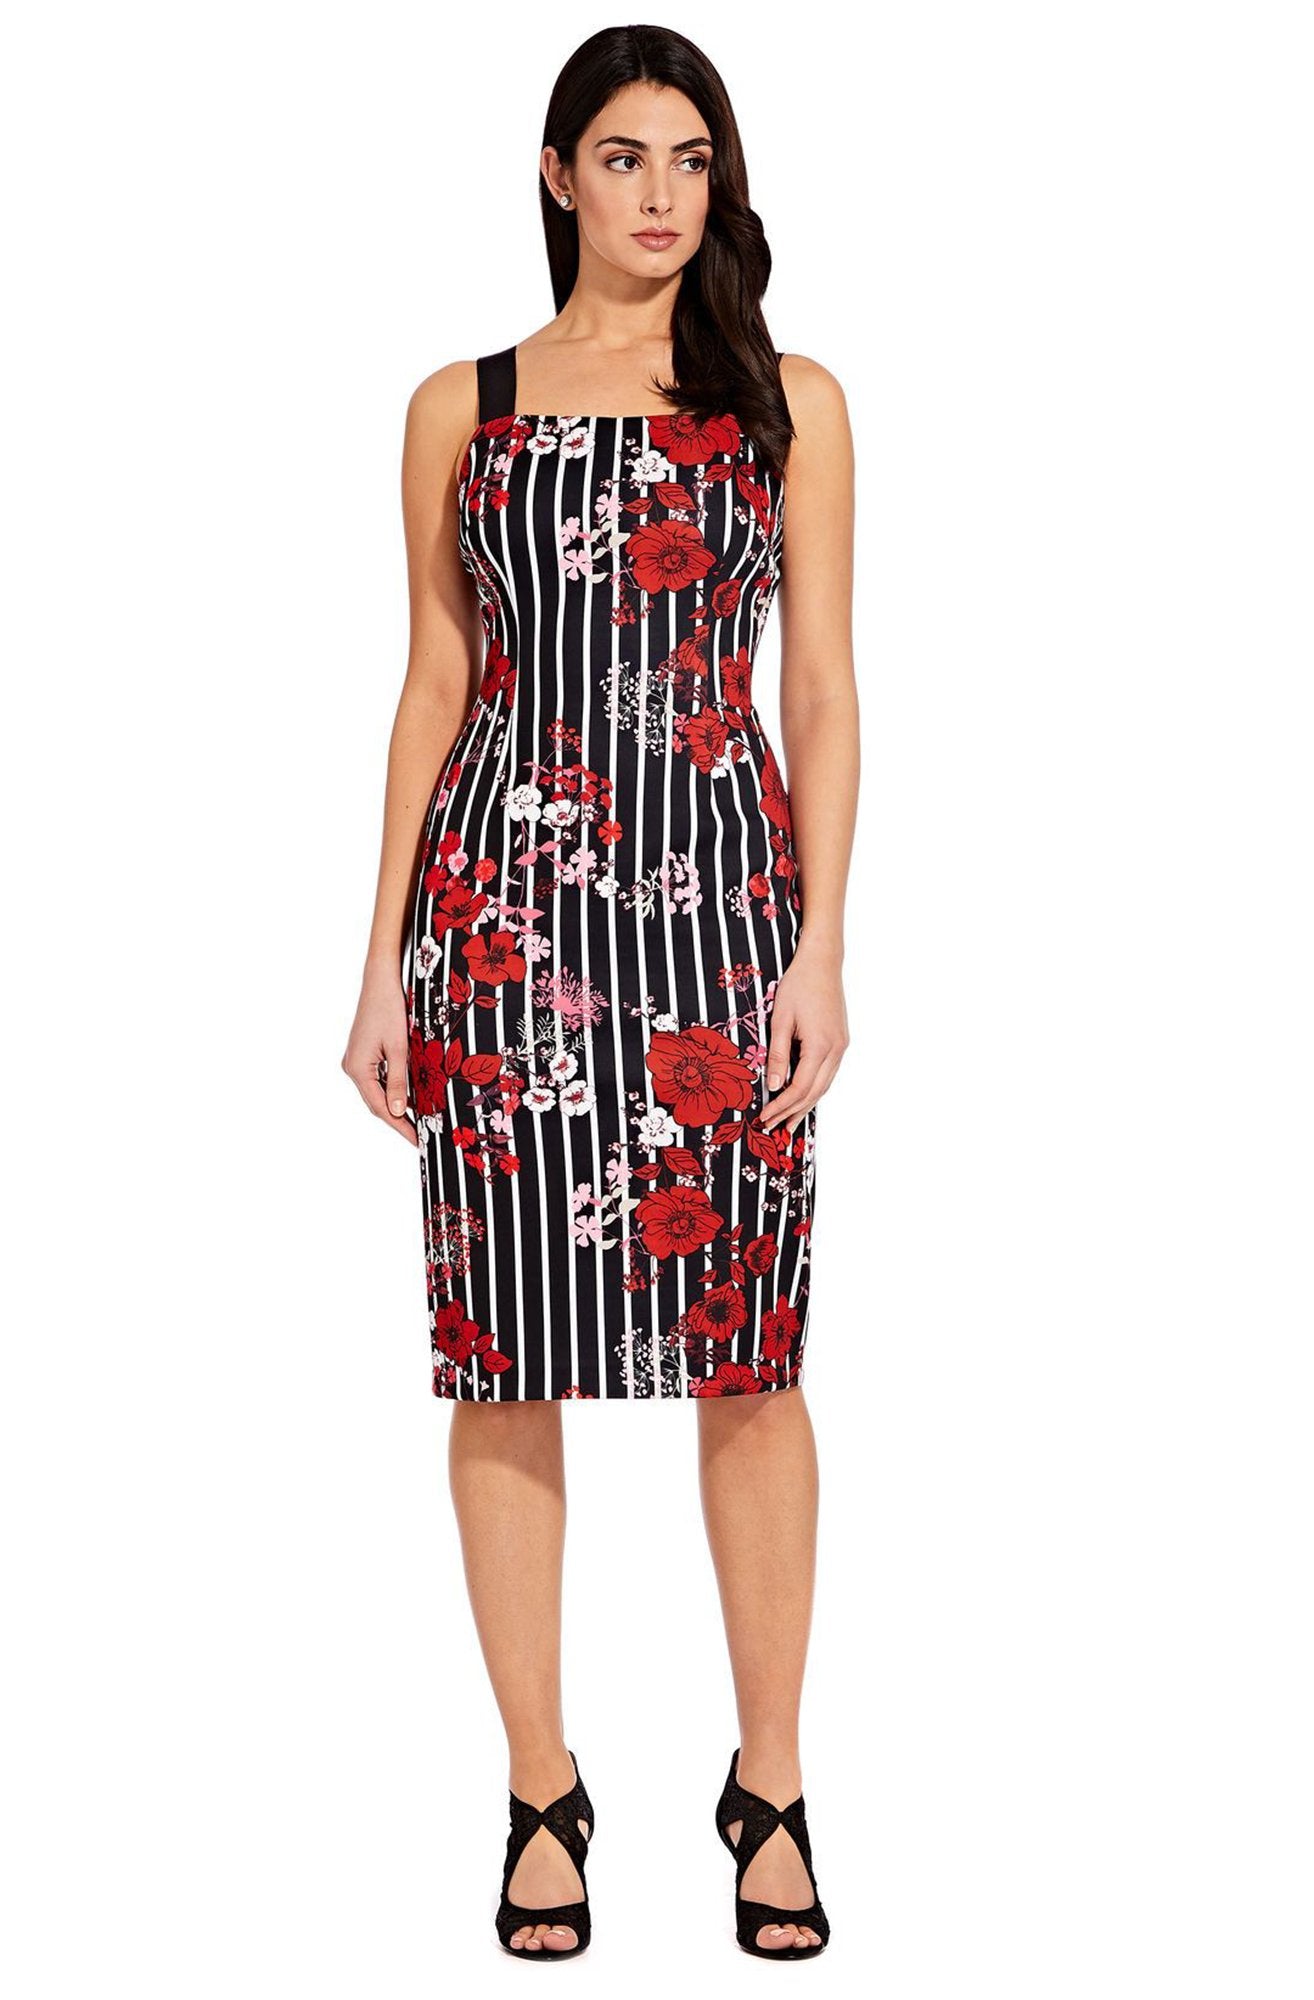 Adrianna Papell - AP1D103092 Printed Scuba Square Neck Fitted Dress In Black and Multi-Color